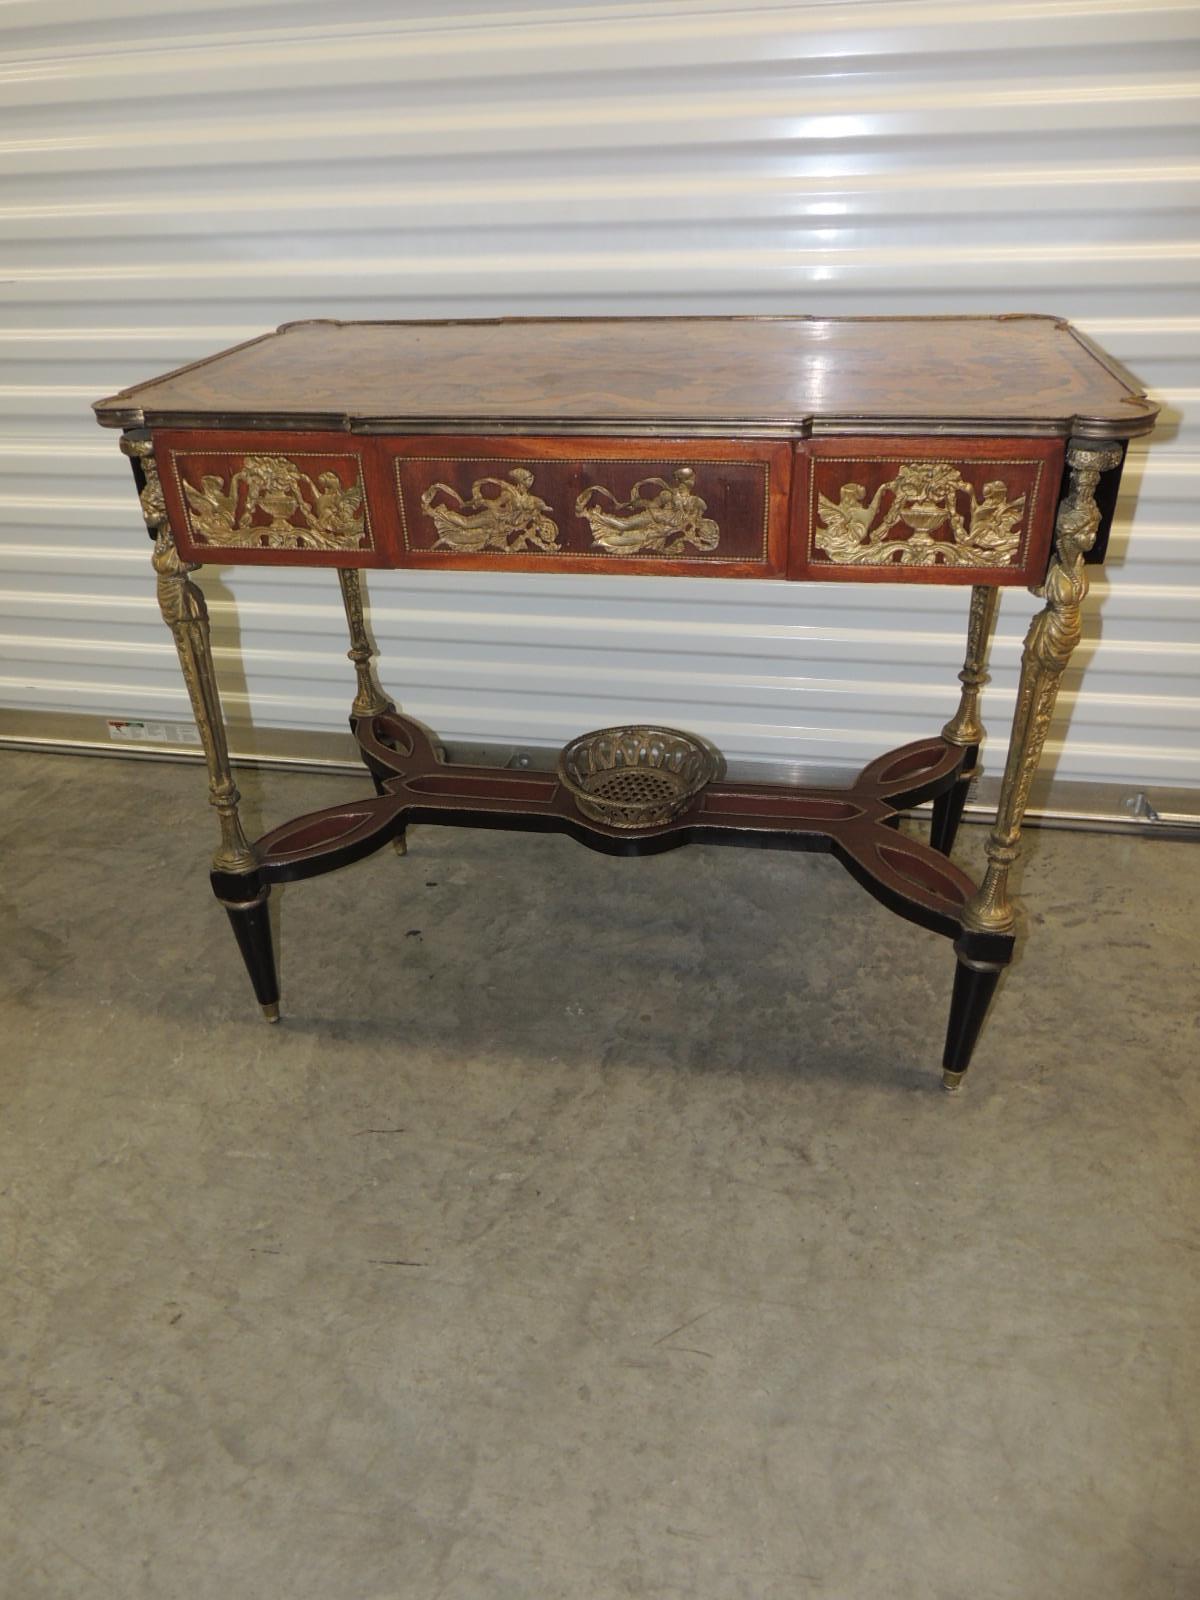 Vintage reproduction of Louis XVI style center table
French style oyster veneer wood and floral marquetry center table with
inlaid wood-top and brass ormolu details. Criss-cross stretcher and center brass basket.
Finished in all sides. The